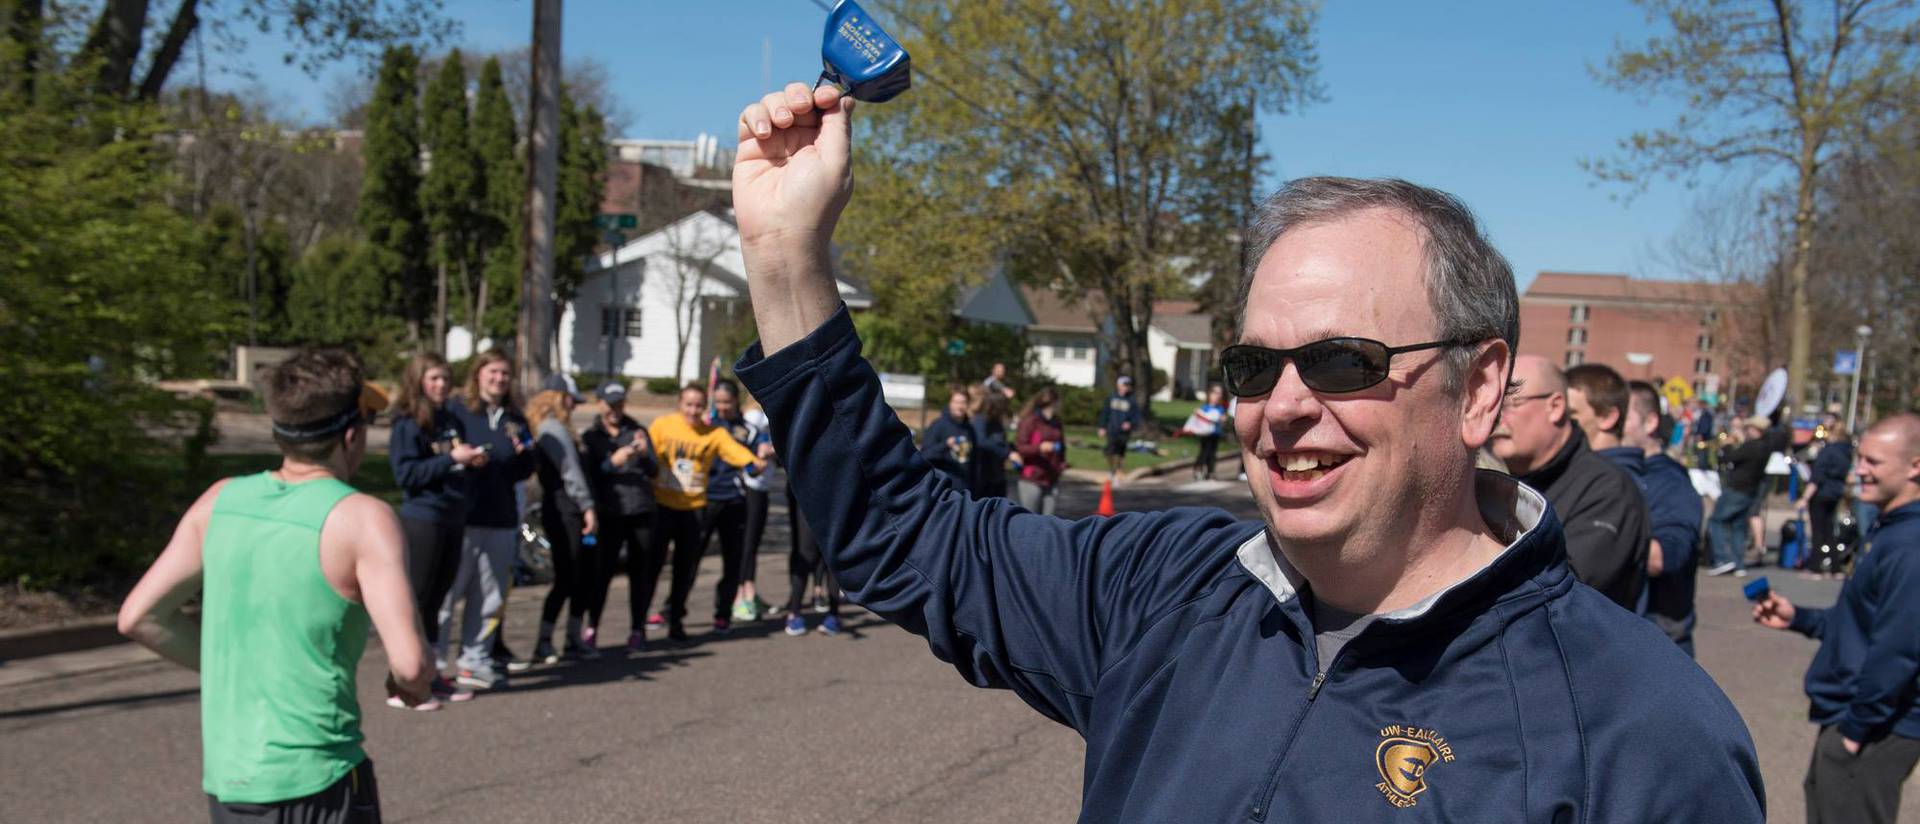 Chancellor Schmidt cheering on runners along the Blugold Mile